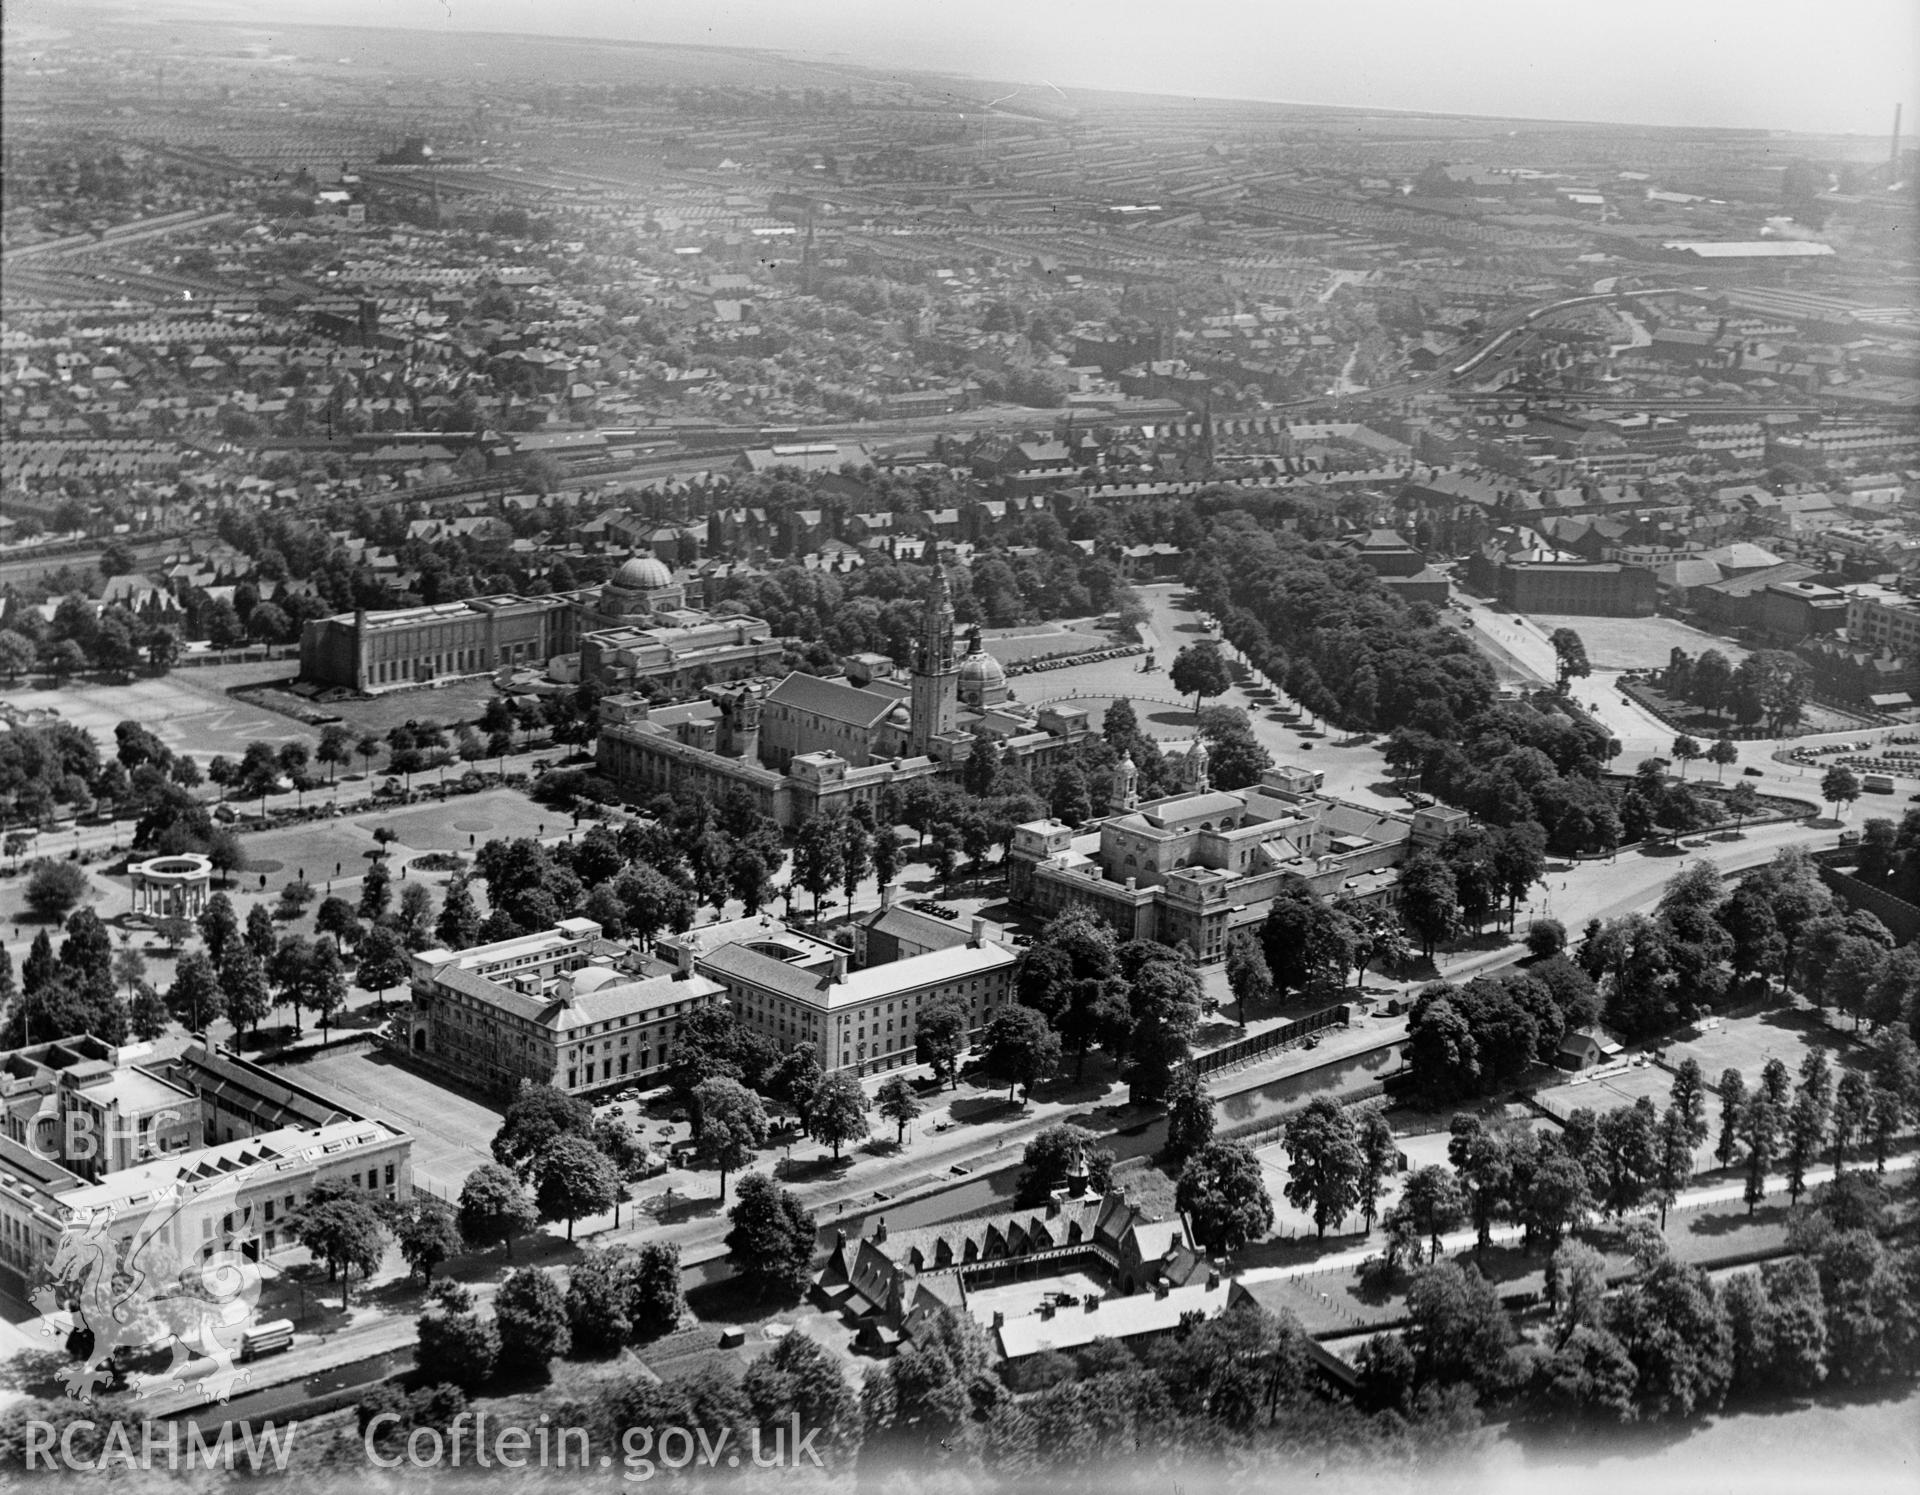 General view of Cathays Park, Cardiff, oblique aerial view. 5?x4? black and white glass plate negative.